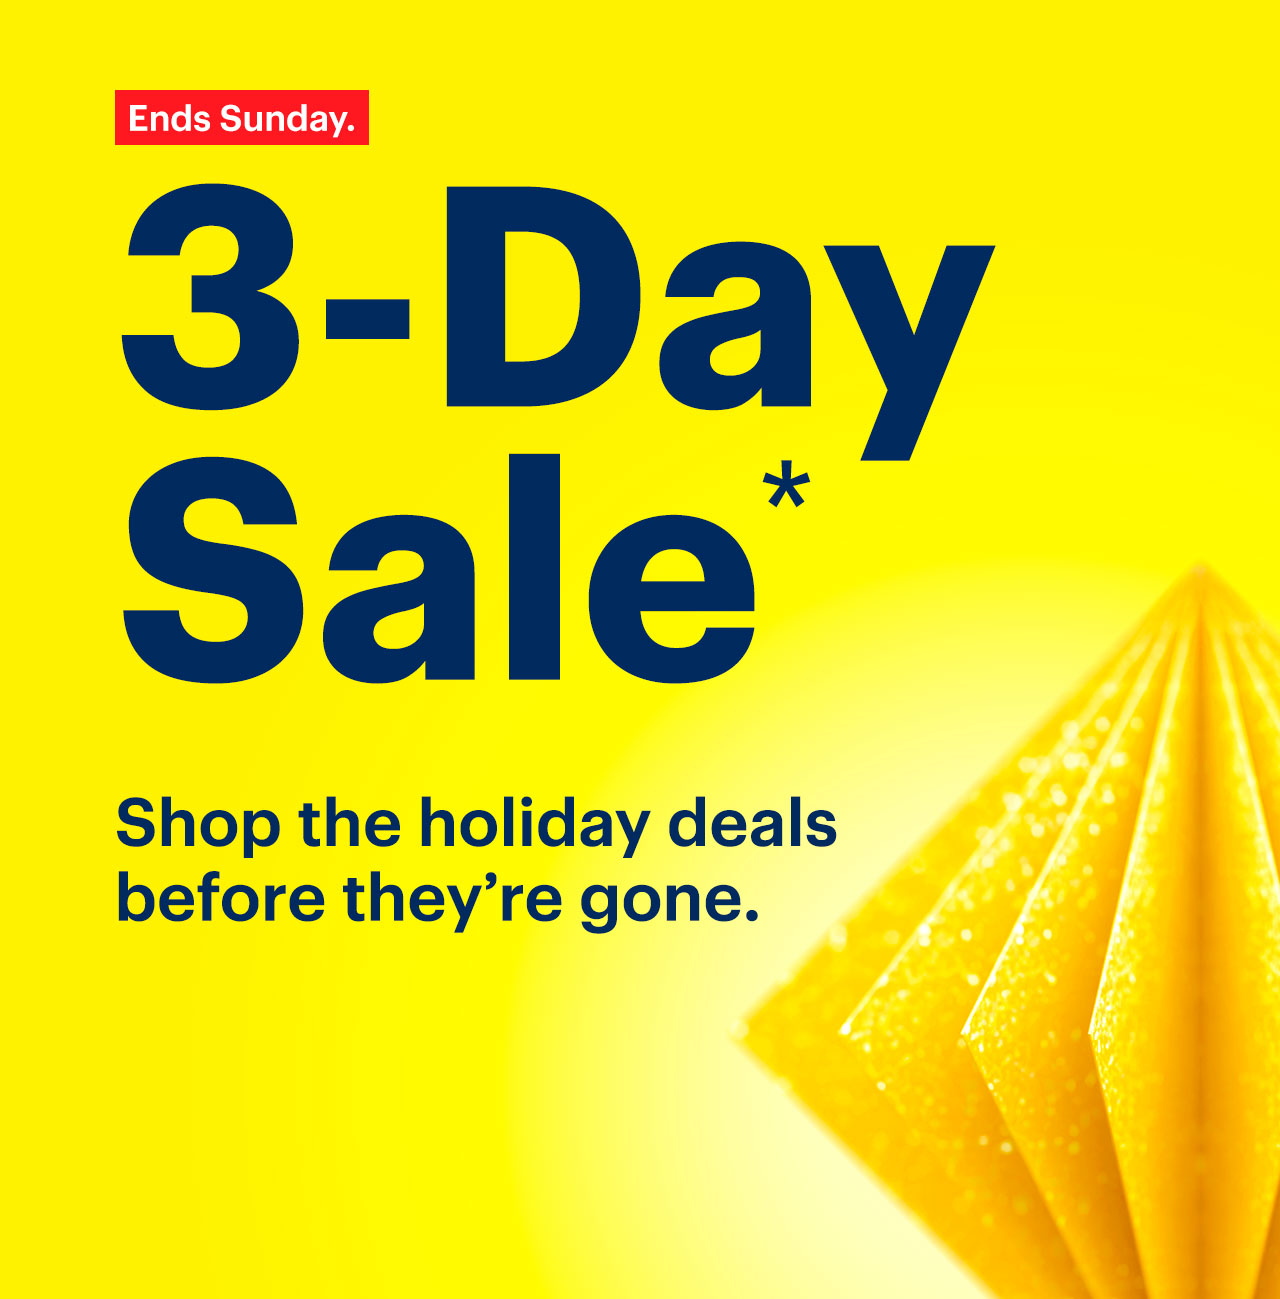 3-Day Sale. Shop the holiday deals before they're gone. Ends Sunday. Reference disclaimer.